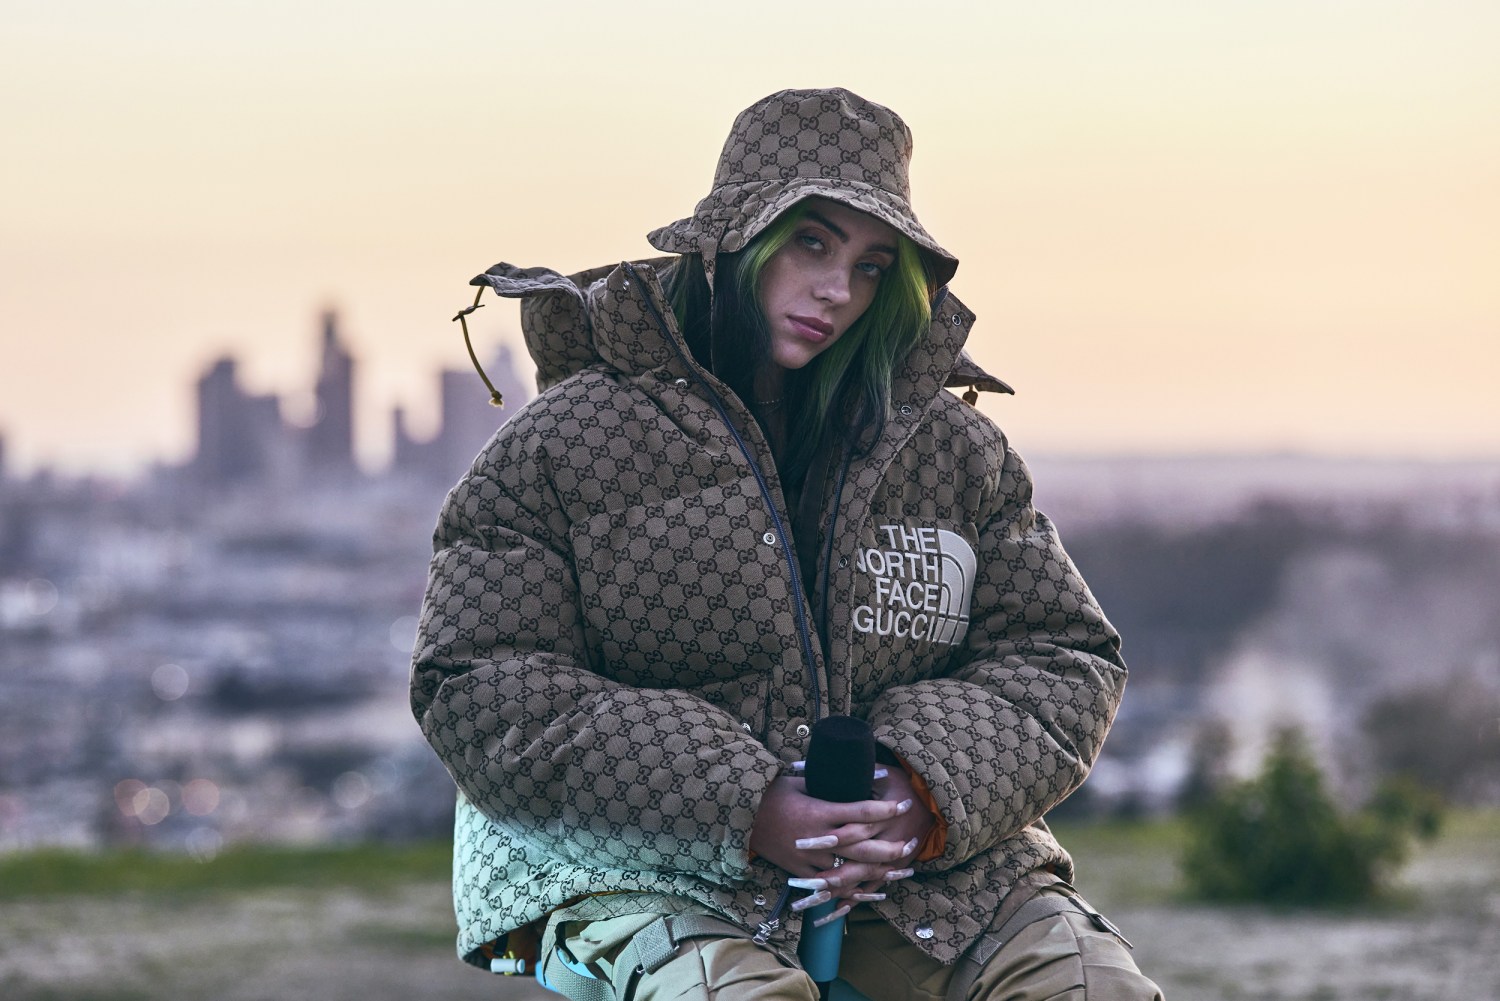 Gucci The North Face Down Jacket